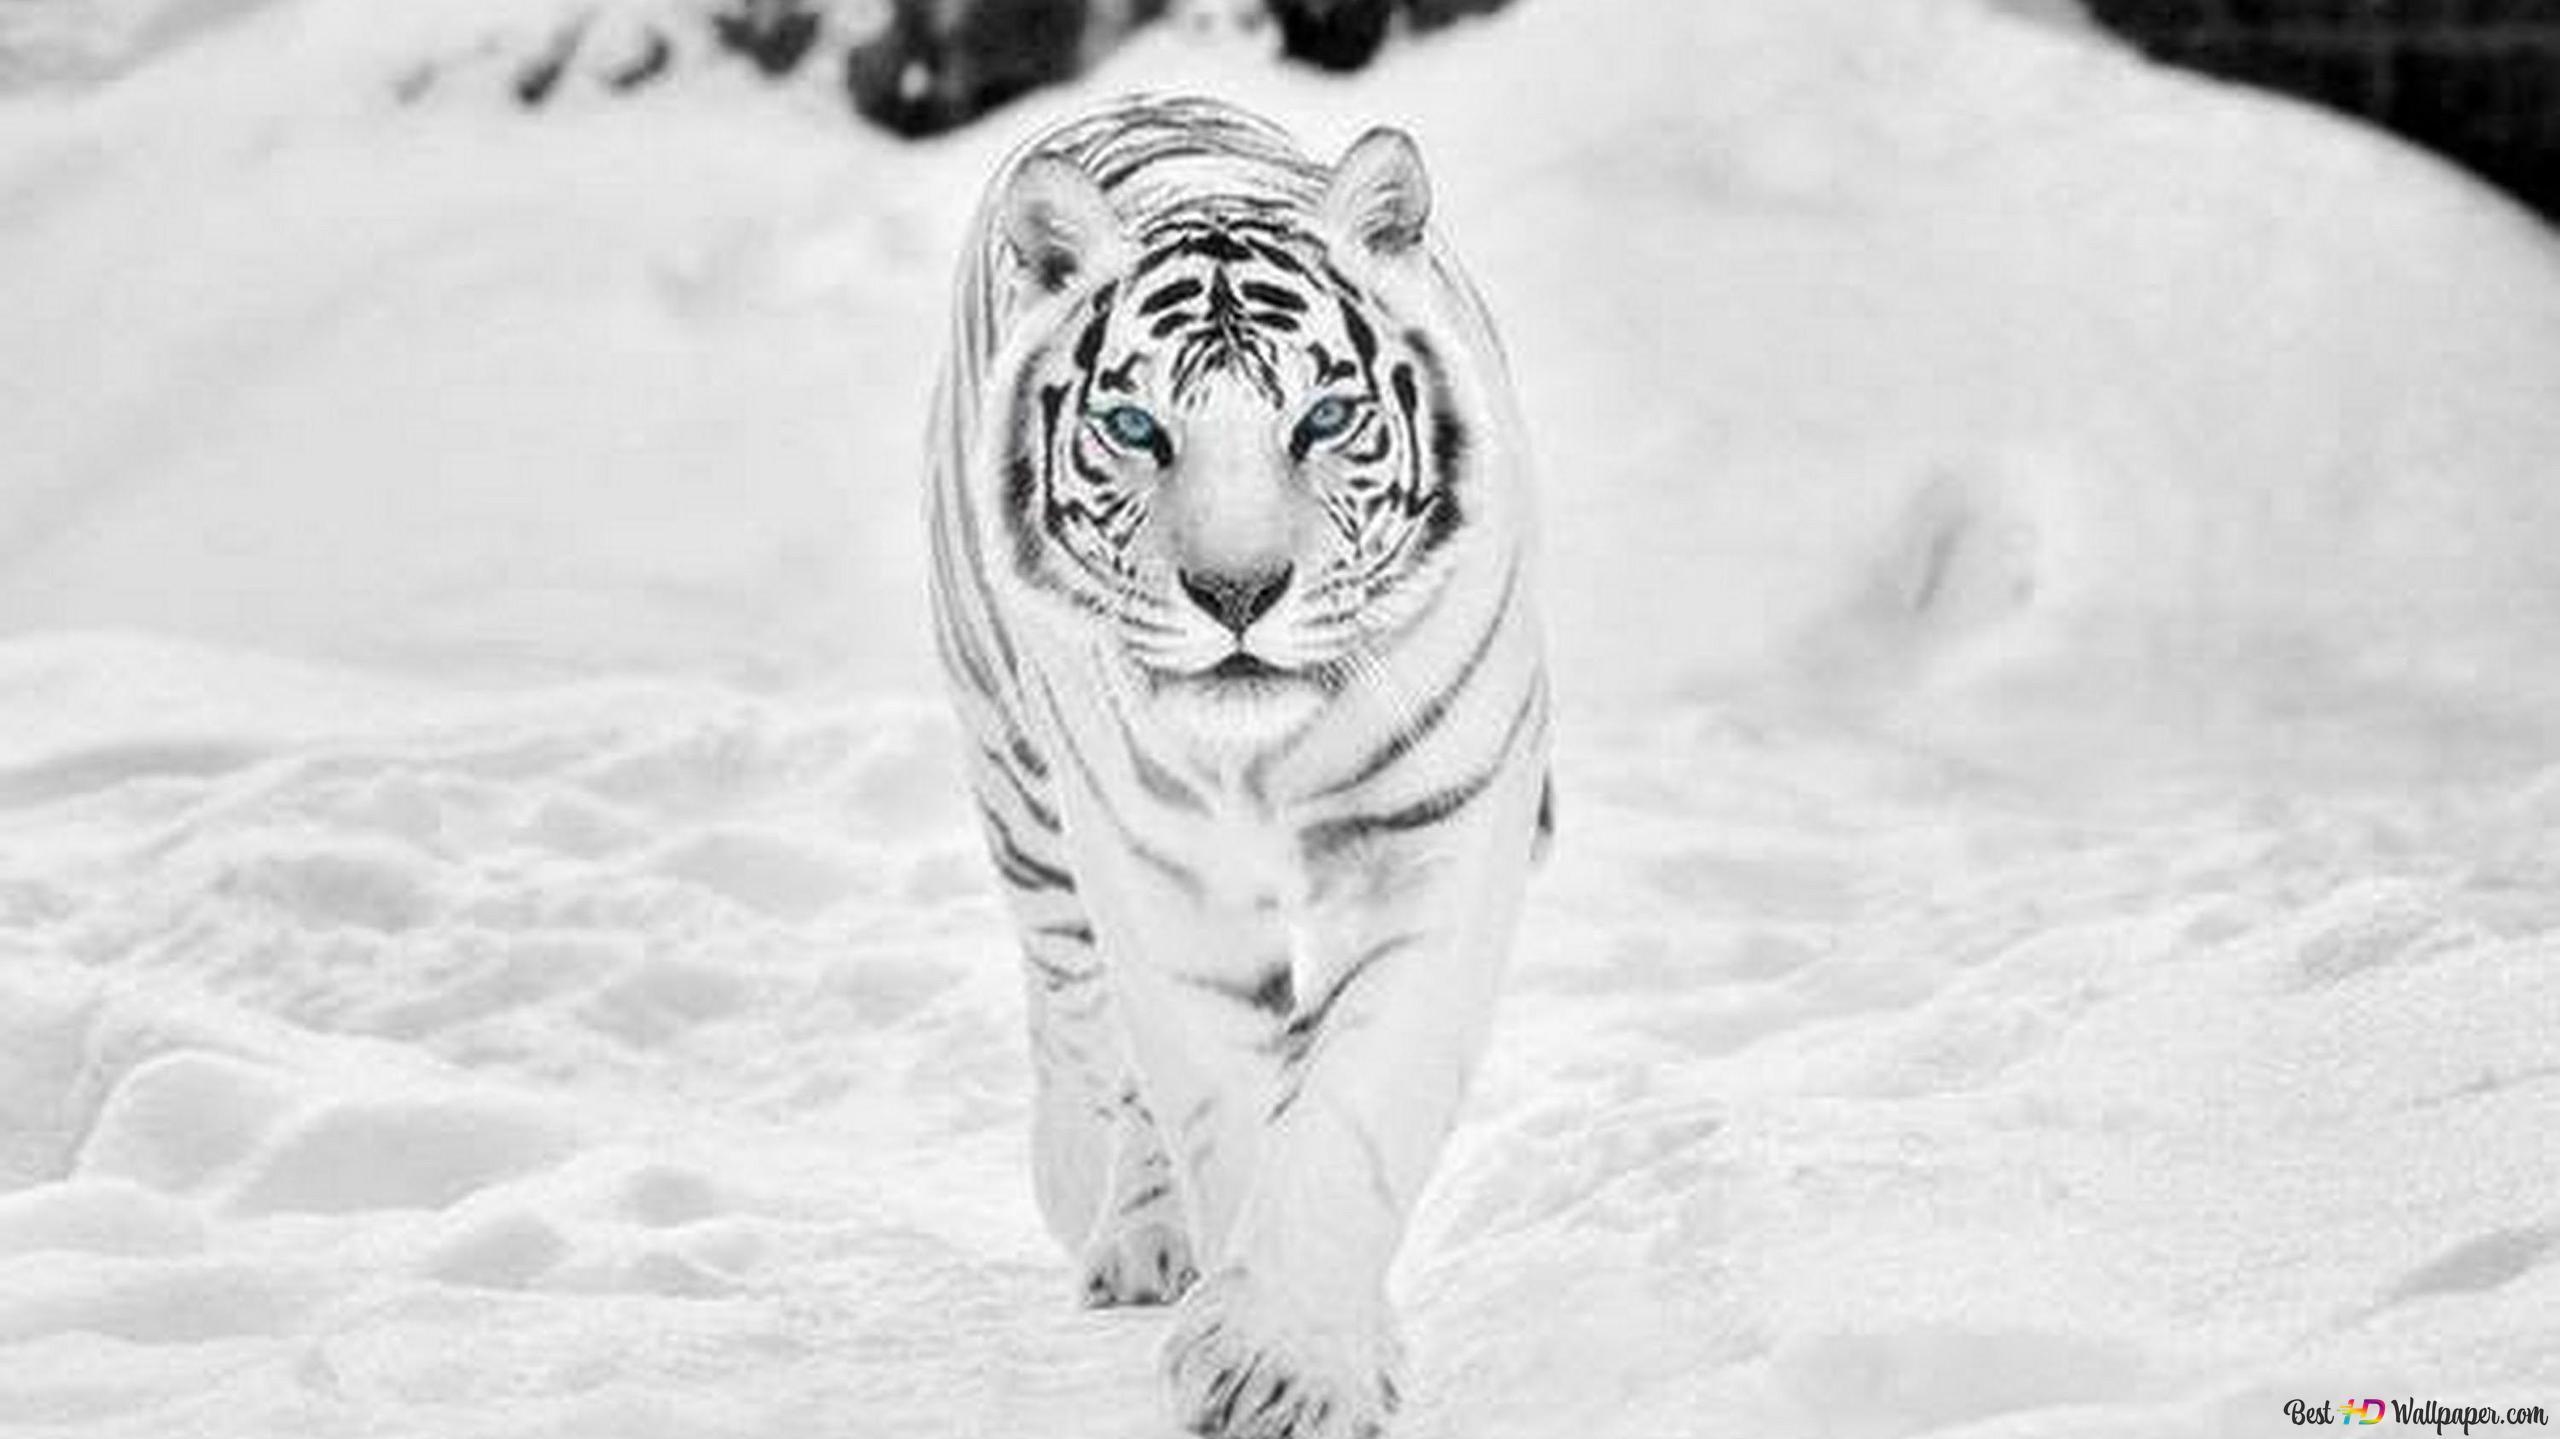 White tiger with blue eyes walking on snow covered ground in